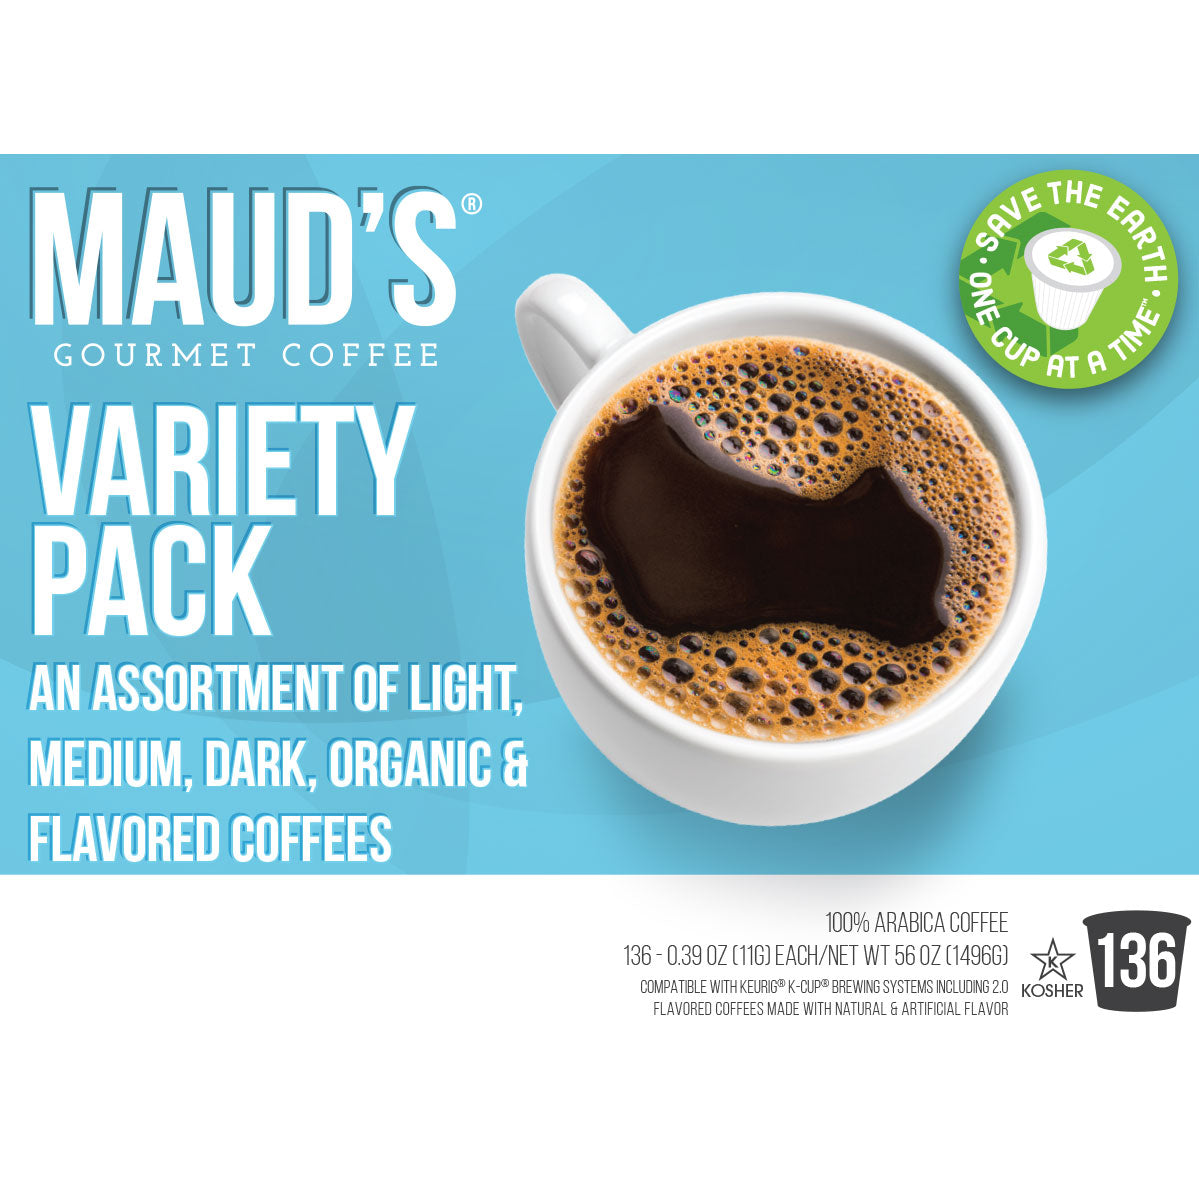 Maud's 12 Flavor Bulk Coffee Variety Pack (Variety Family Pack) - 136 Pods